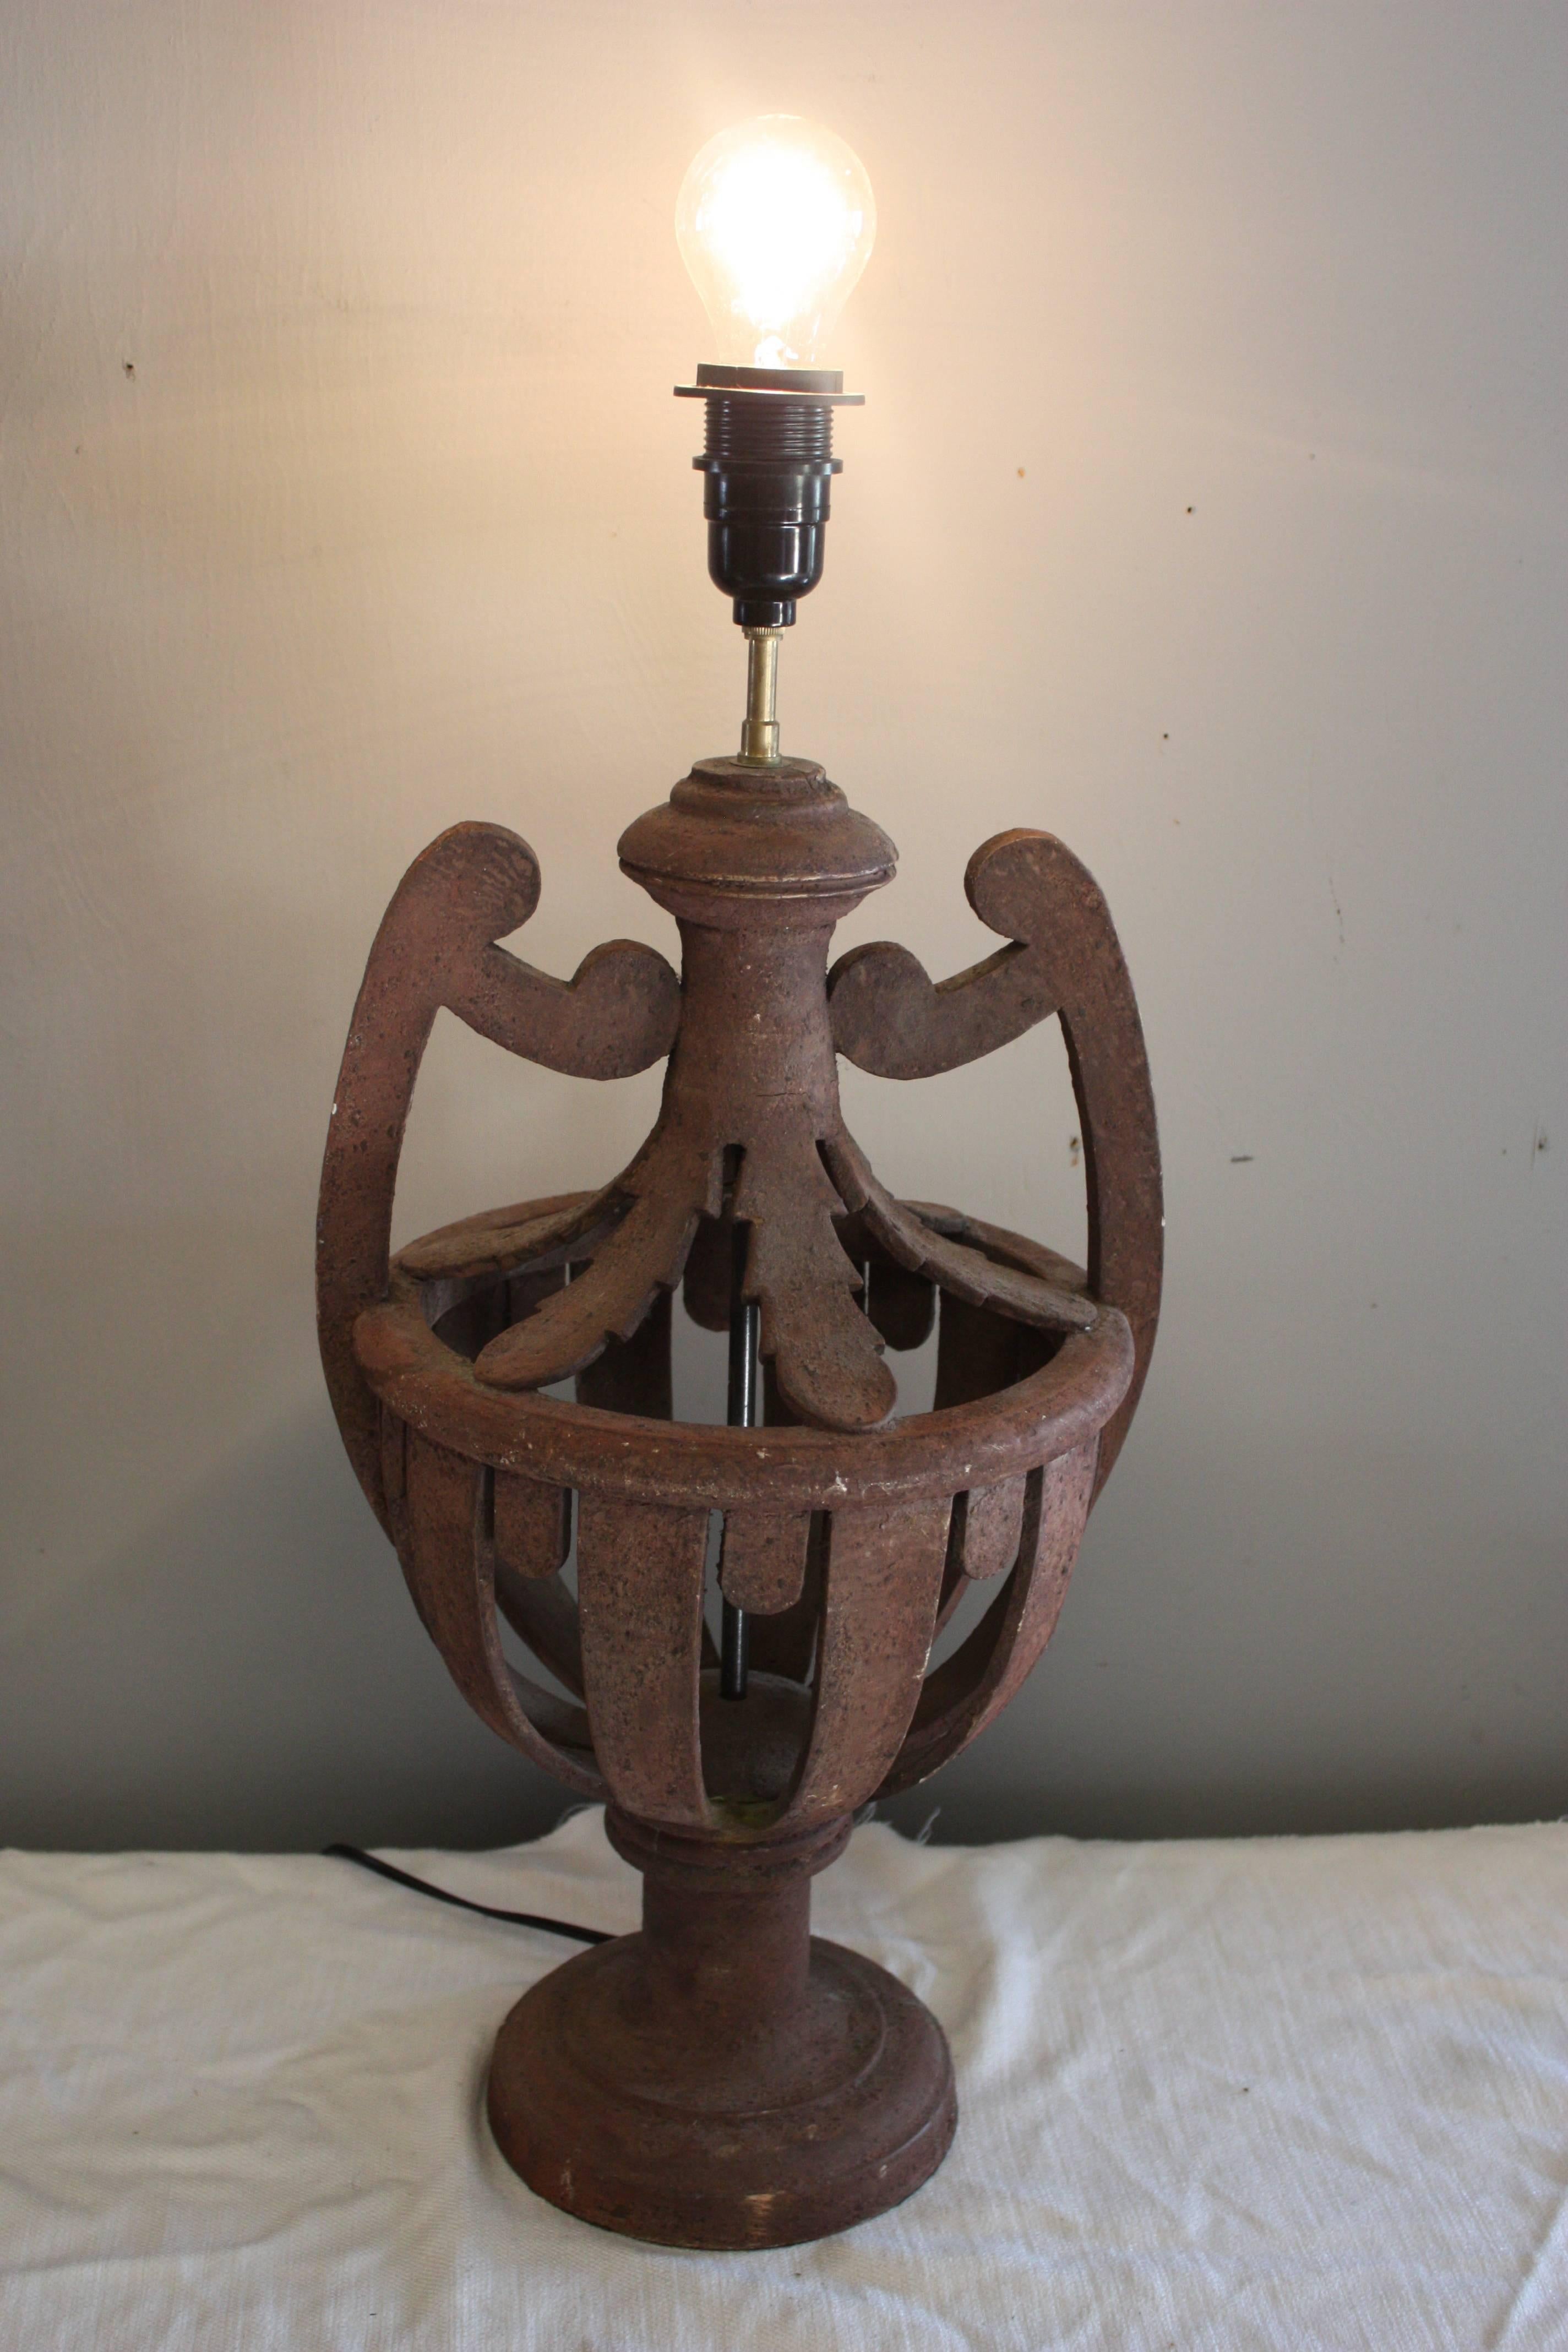 Garden style lamp. Rustic, beautiful, brings the outdoors in.